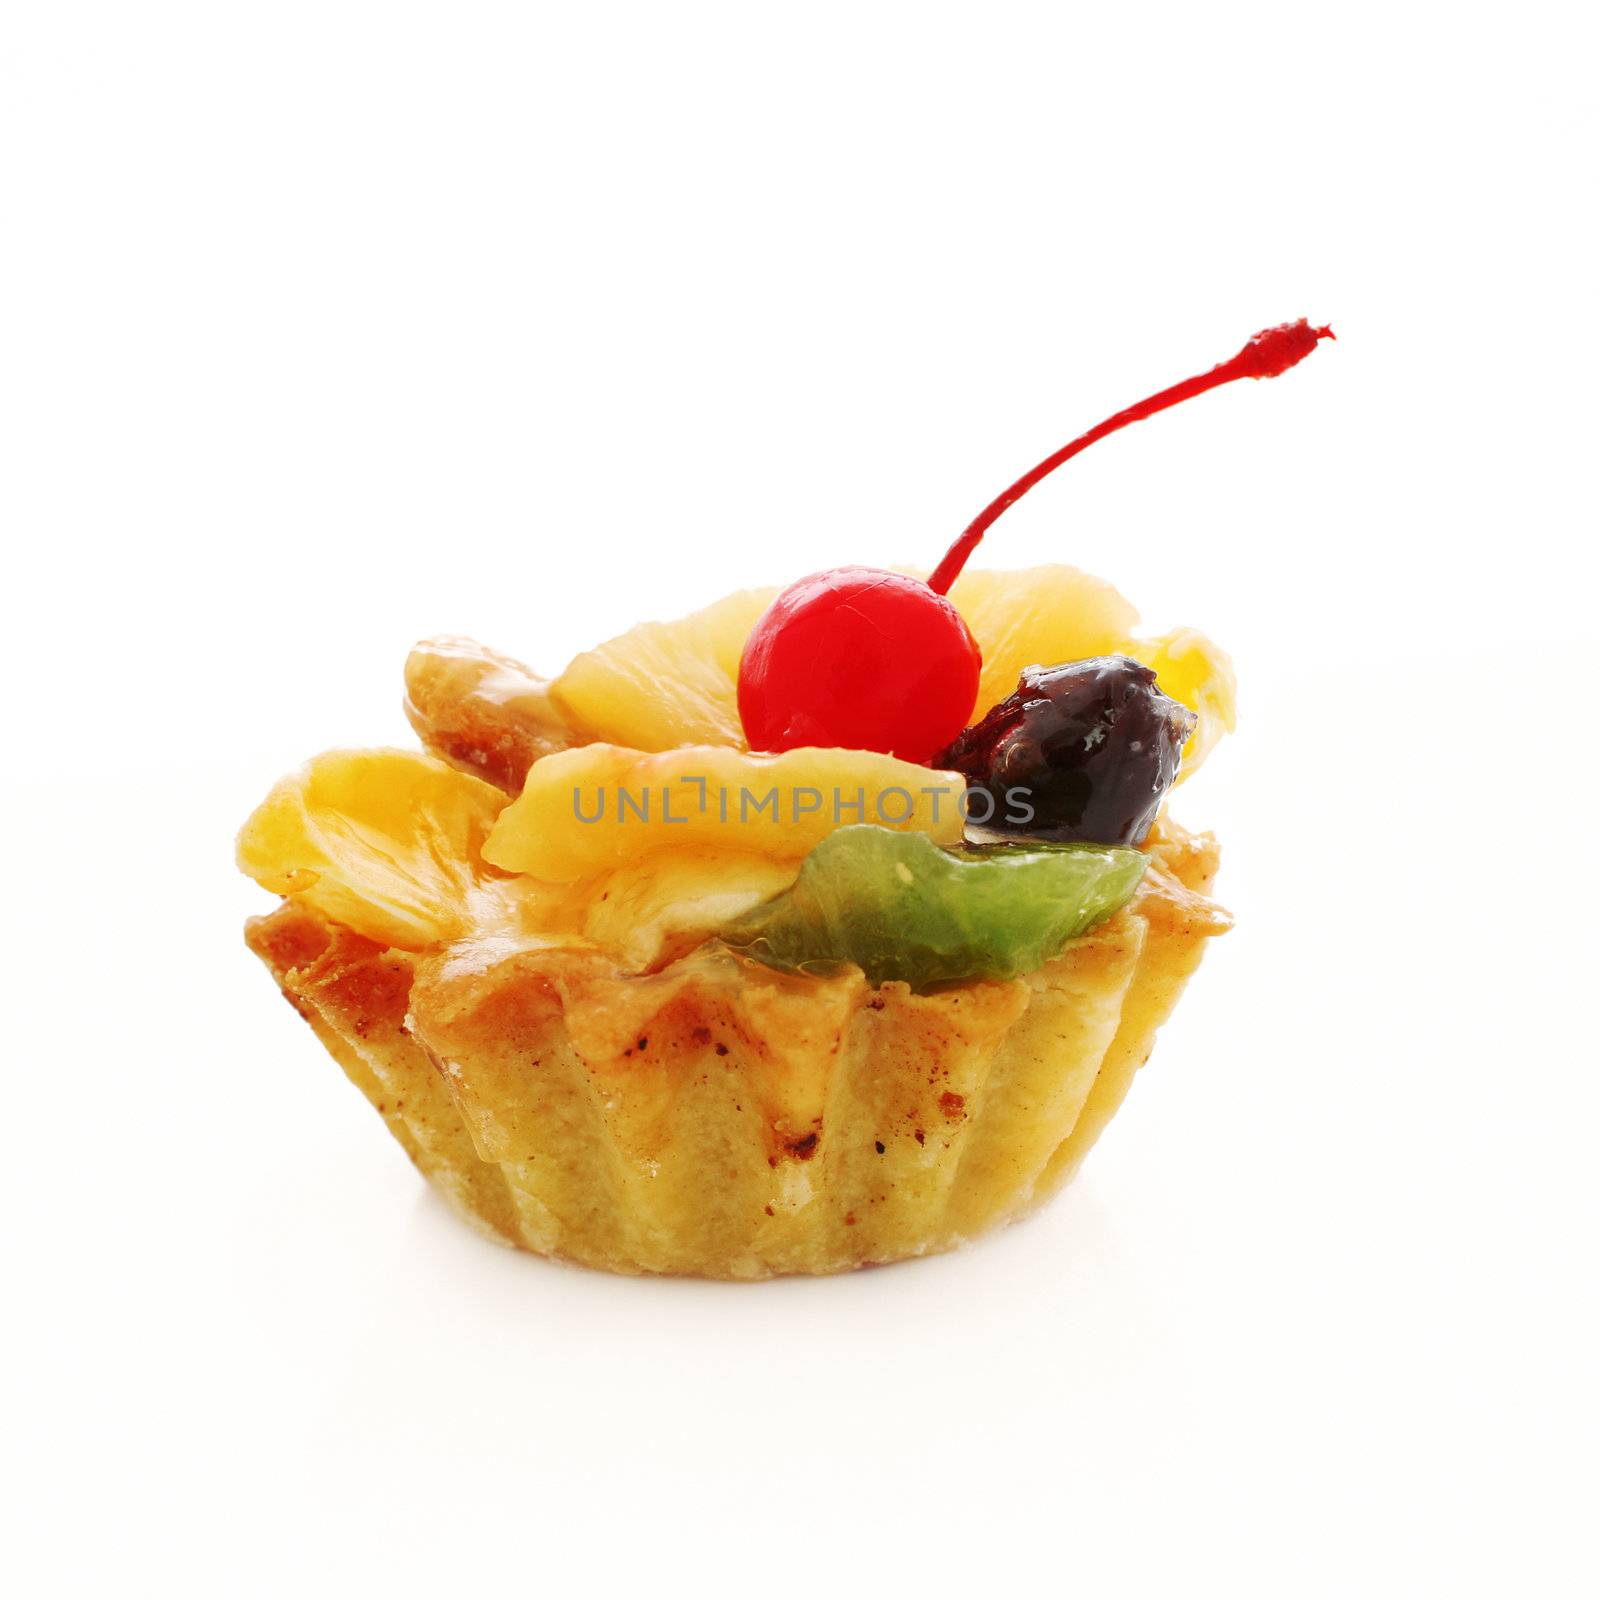 An image of a cake with berry on top. On white background.